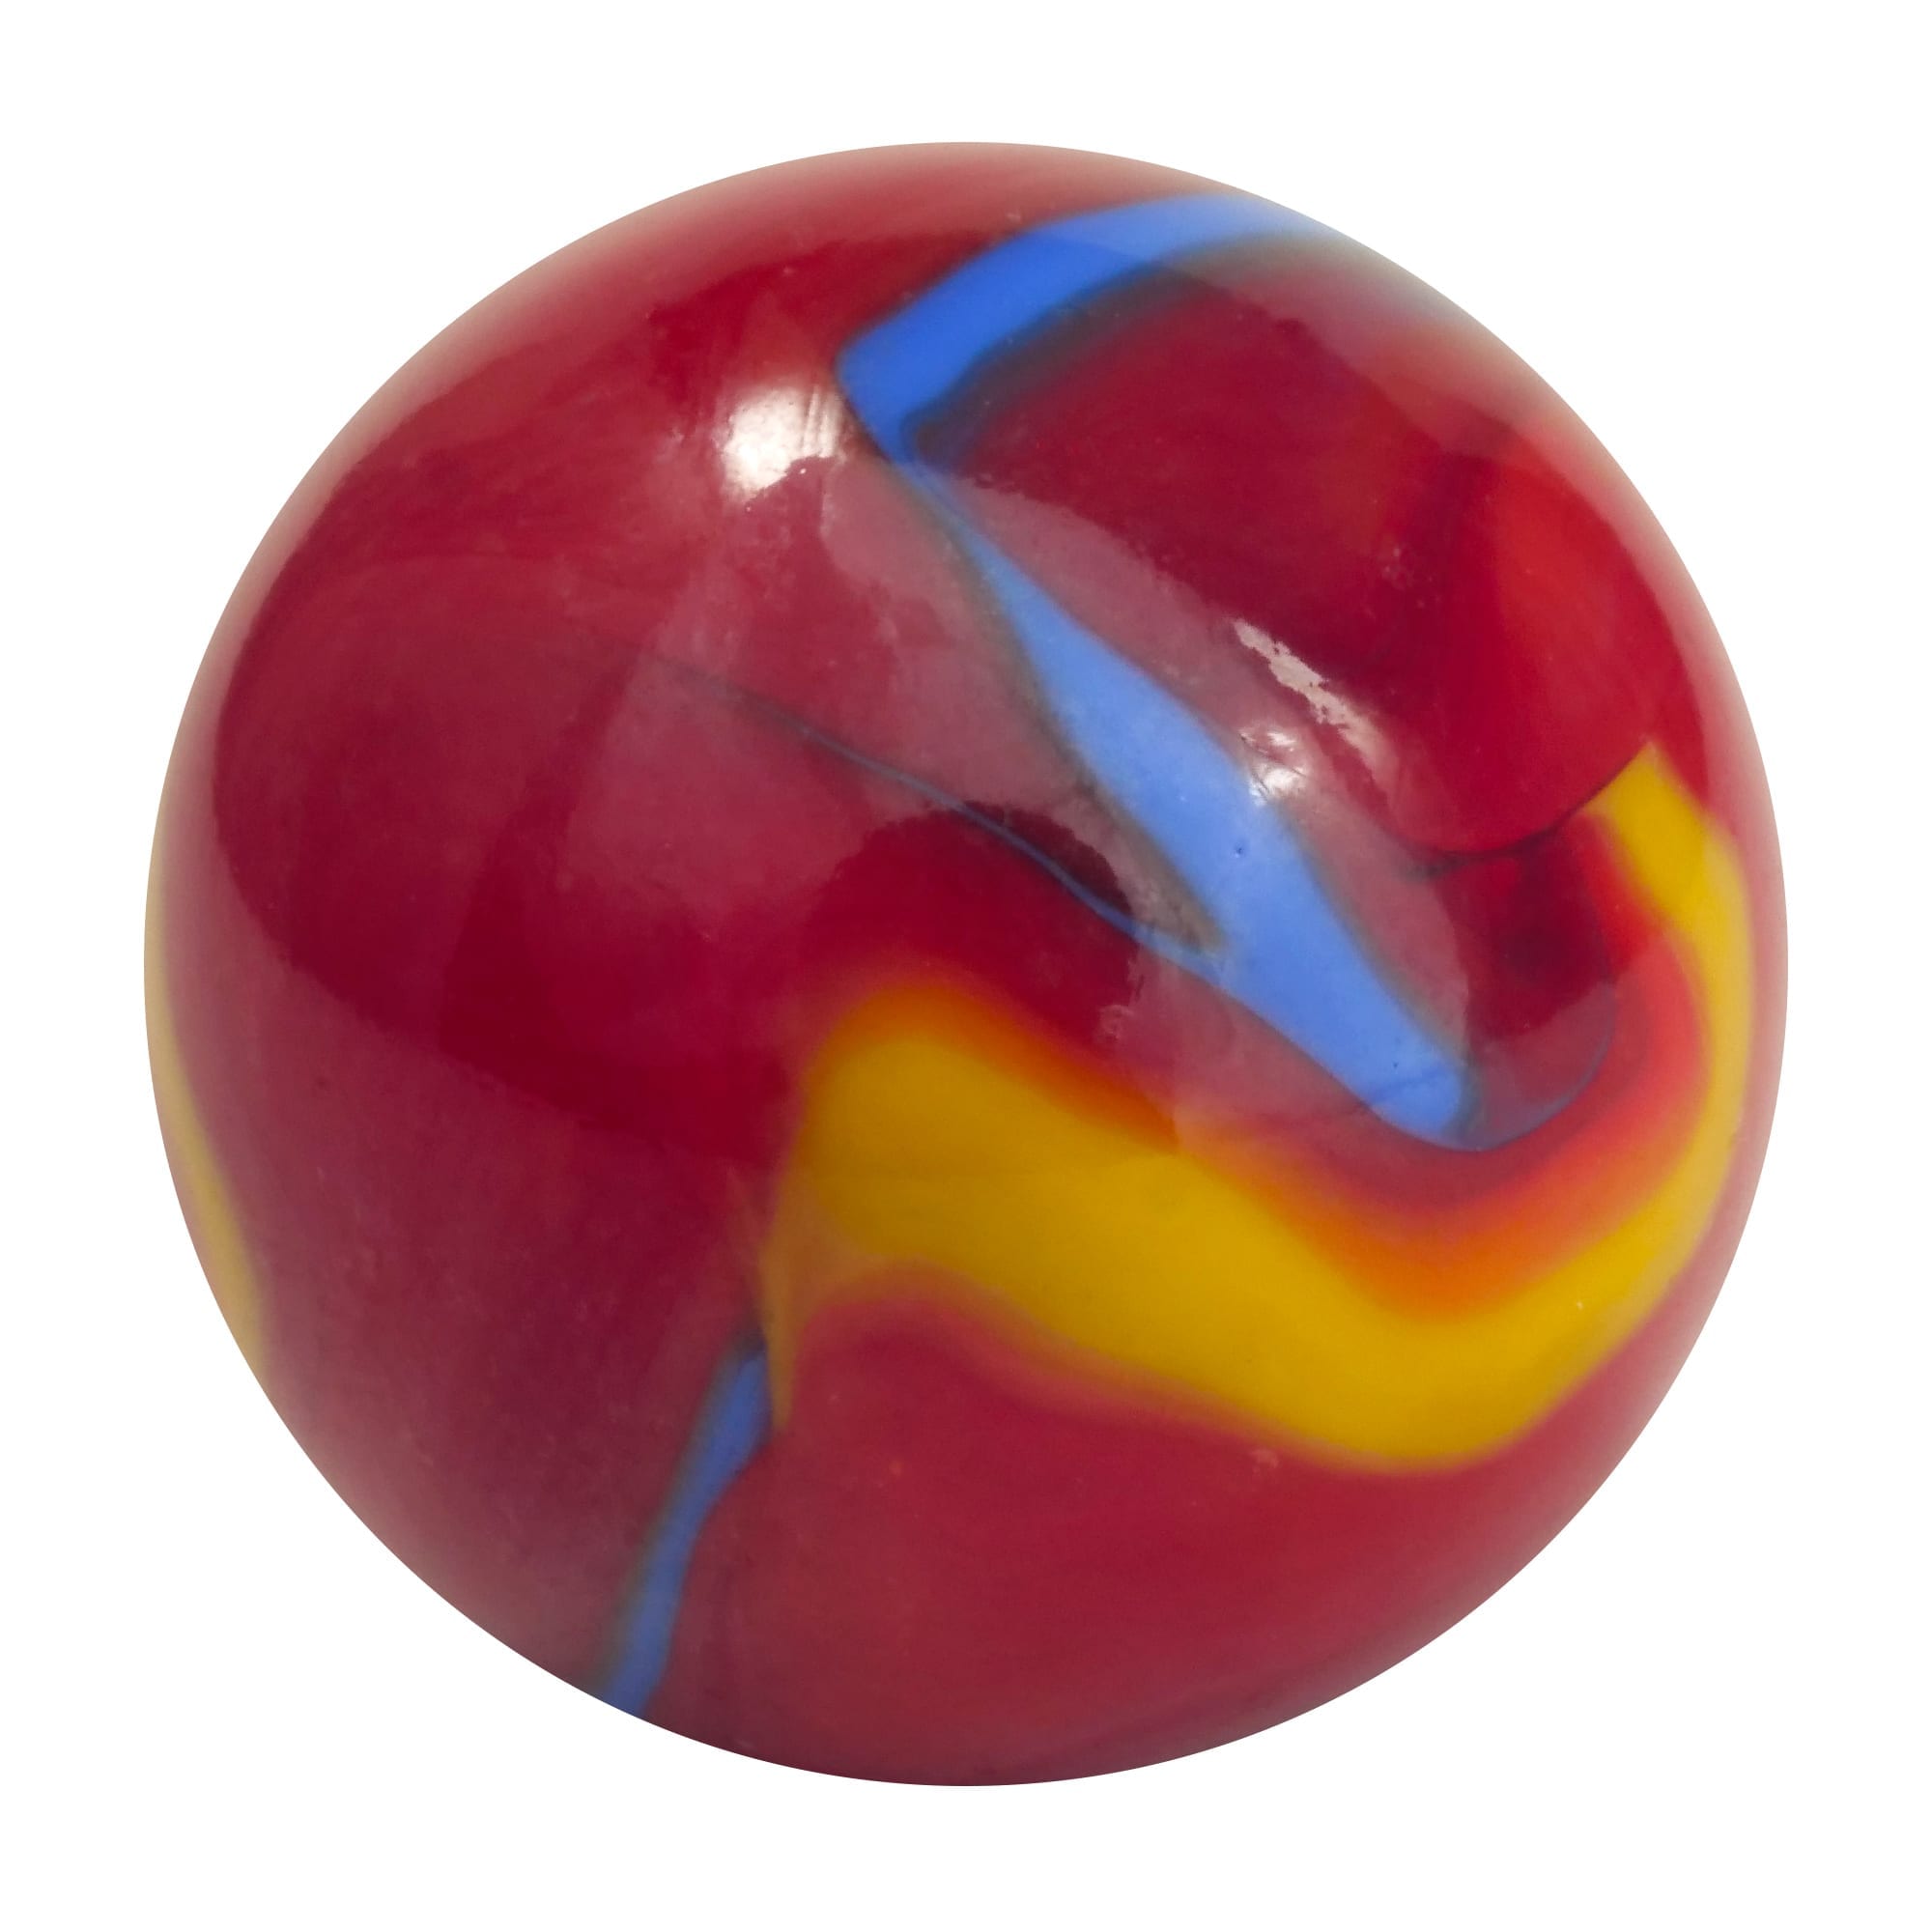 NEW Lot of 3 Marbles 22mm Odin 118237 House of Marbles Red Blue Yellow 